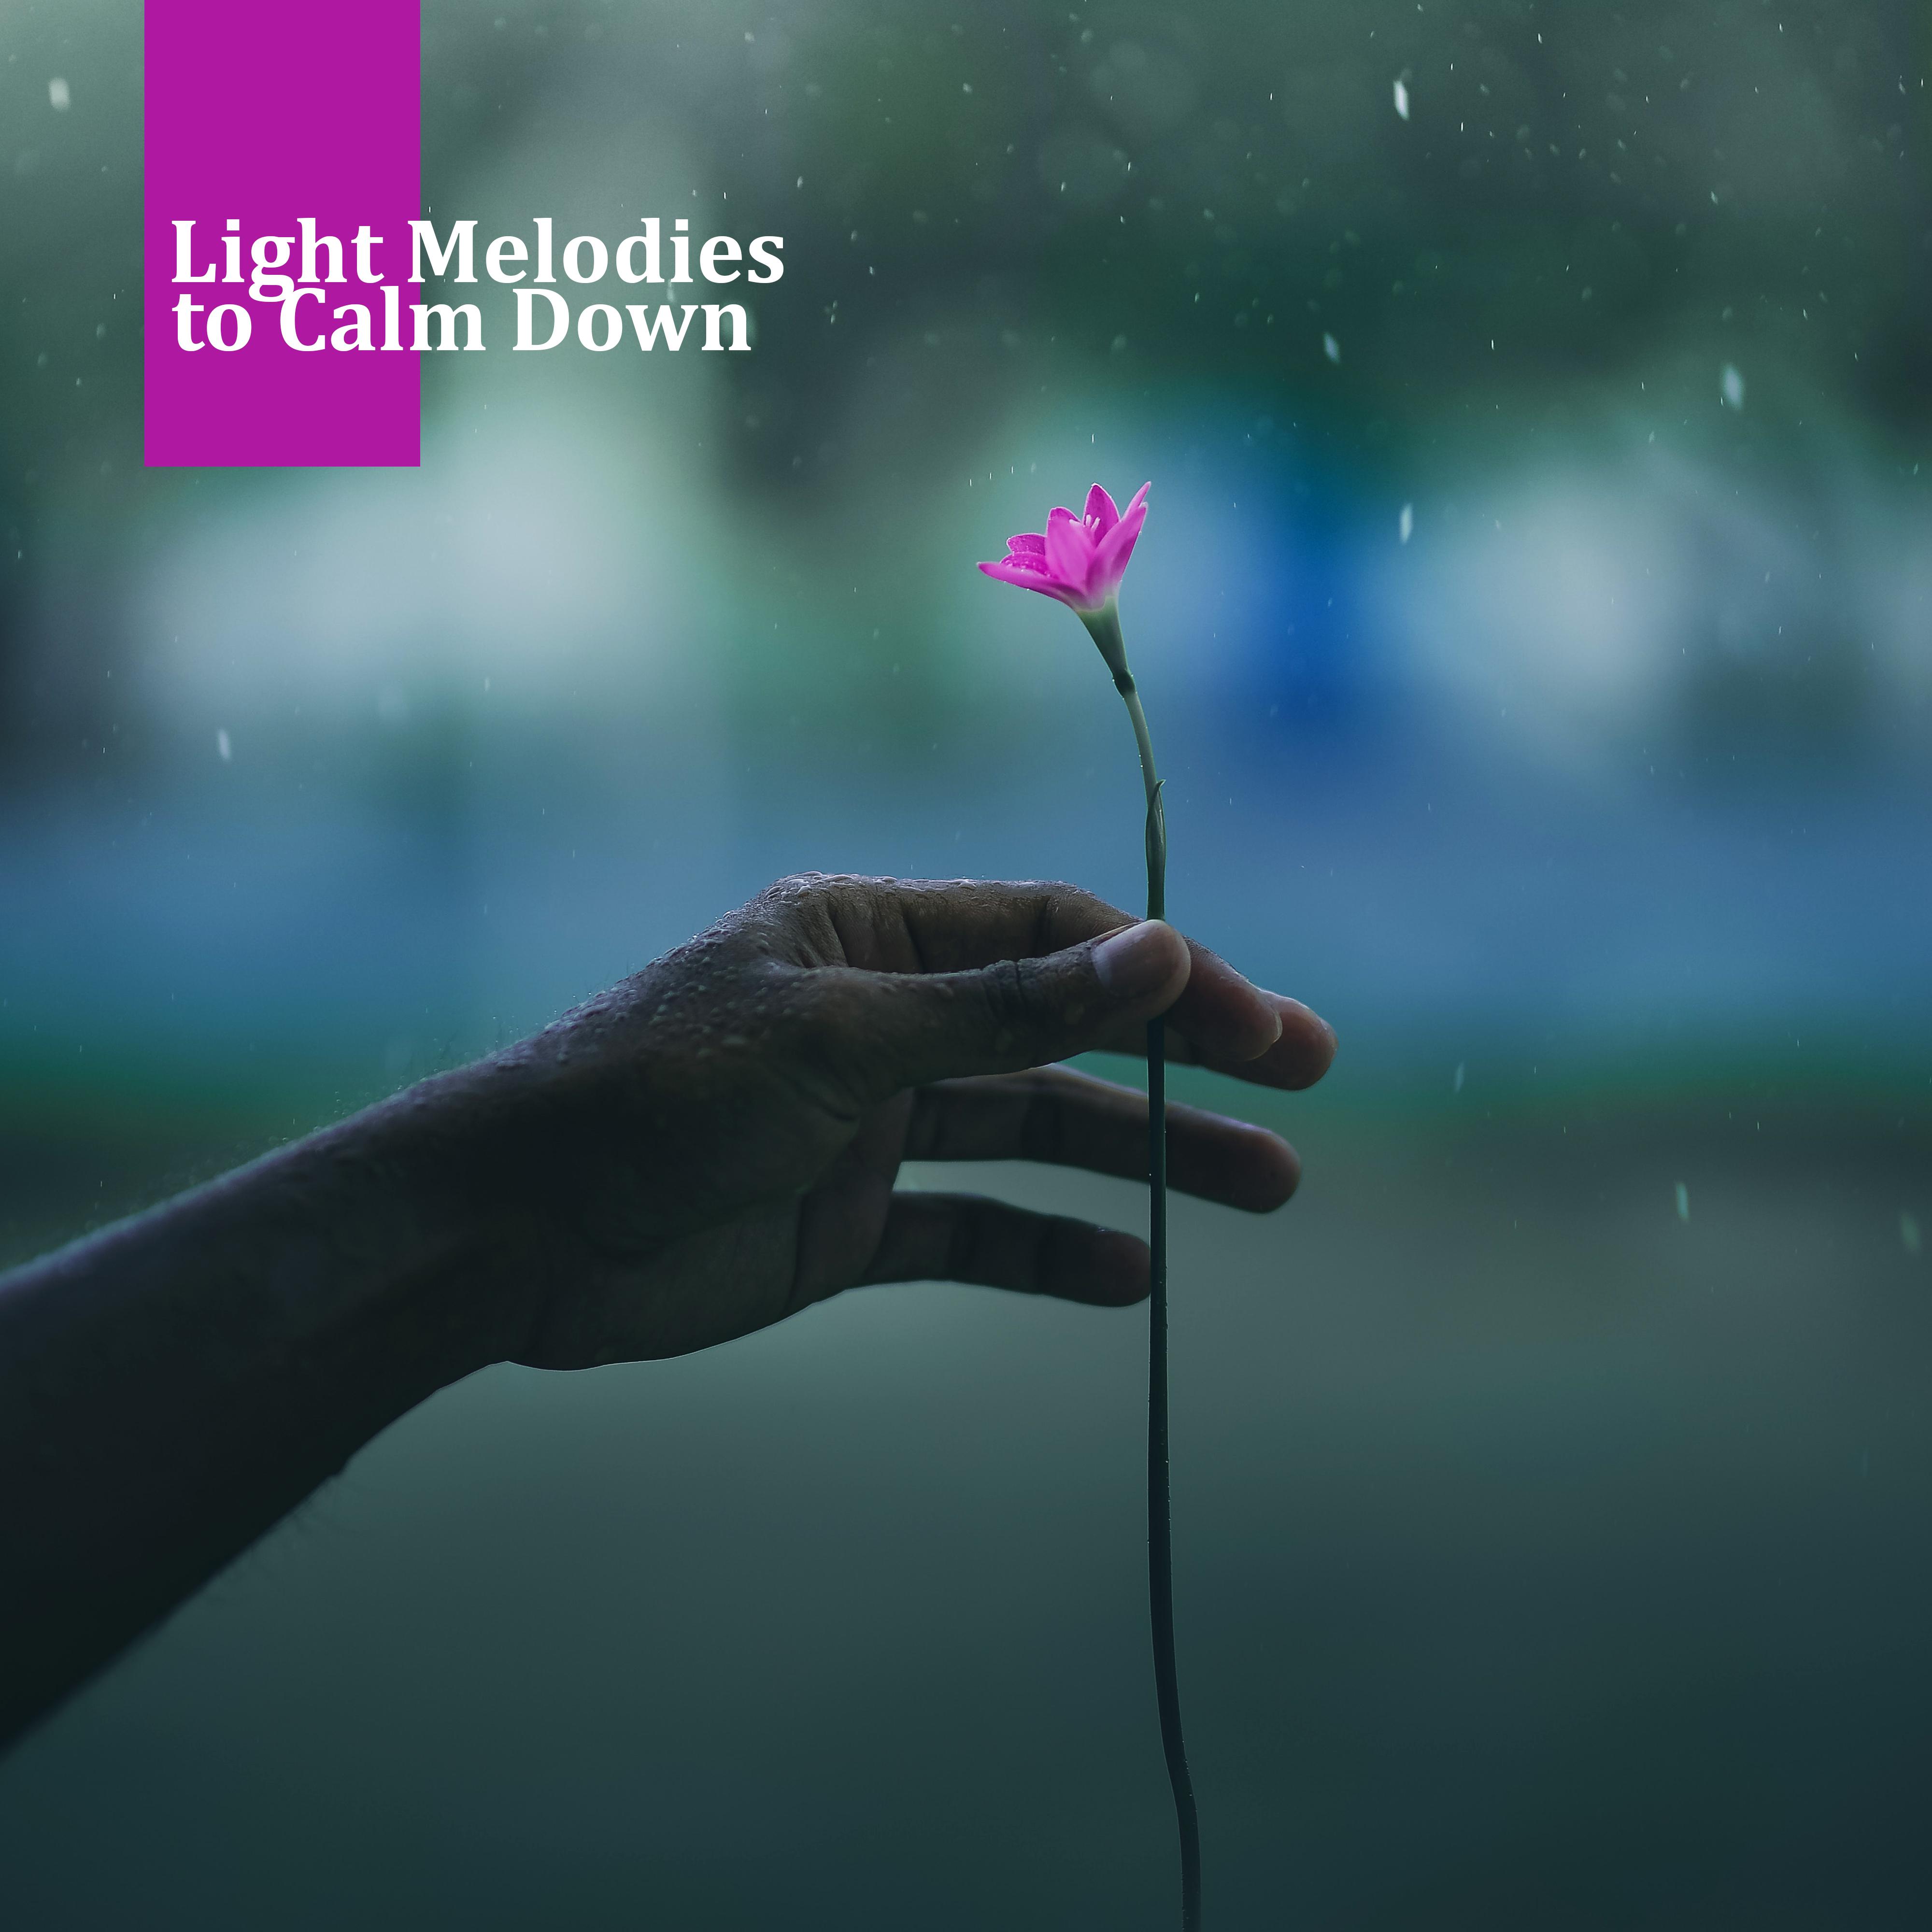 Light Melodies to Calm Down